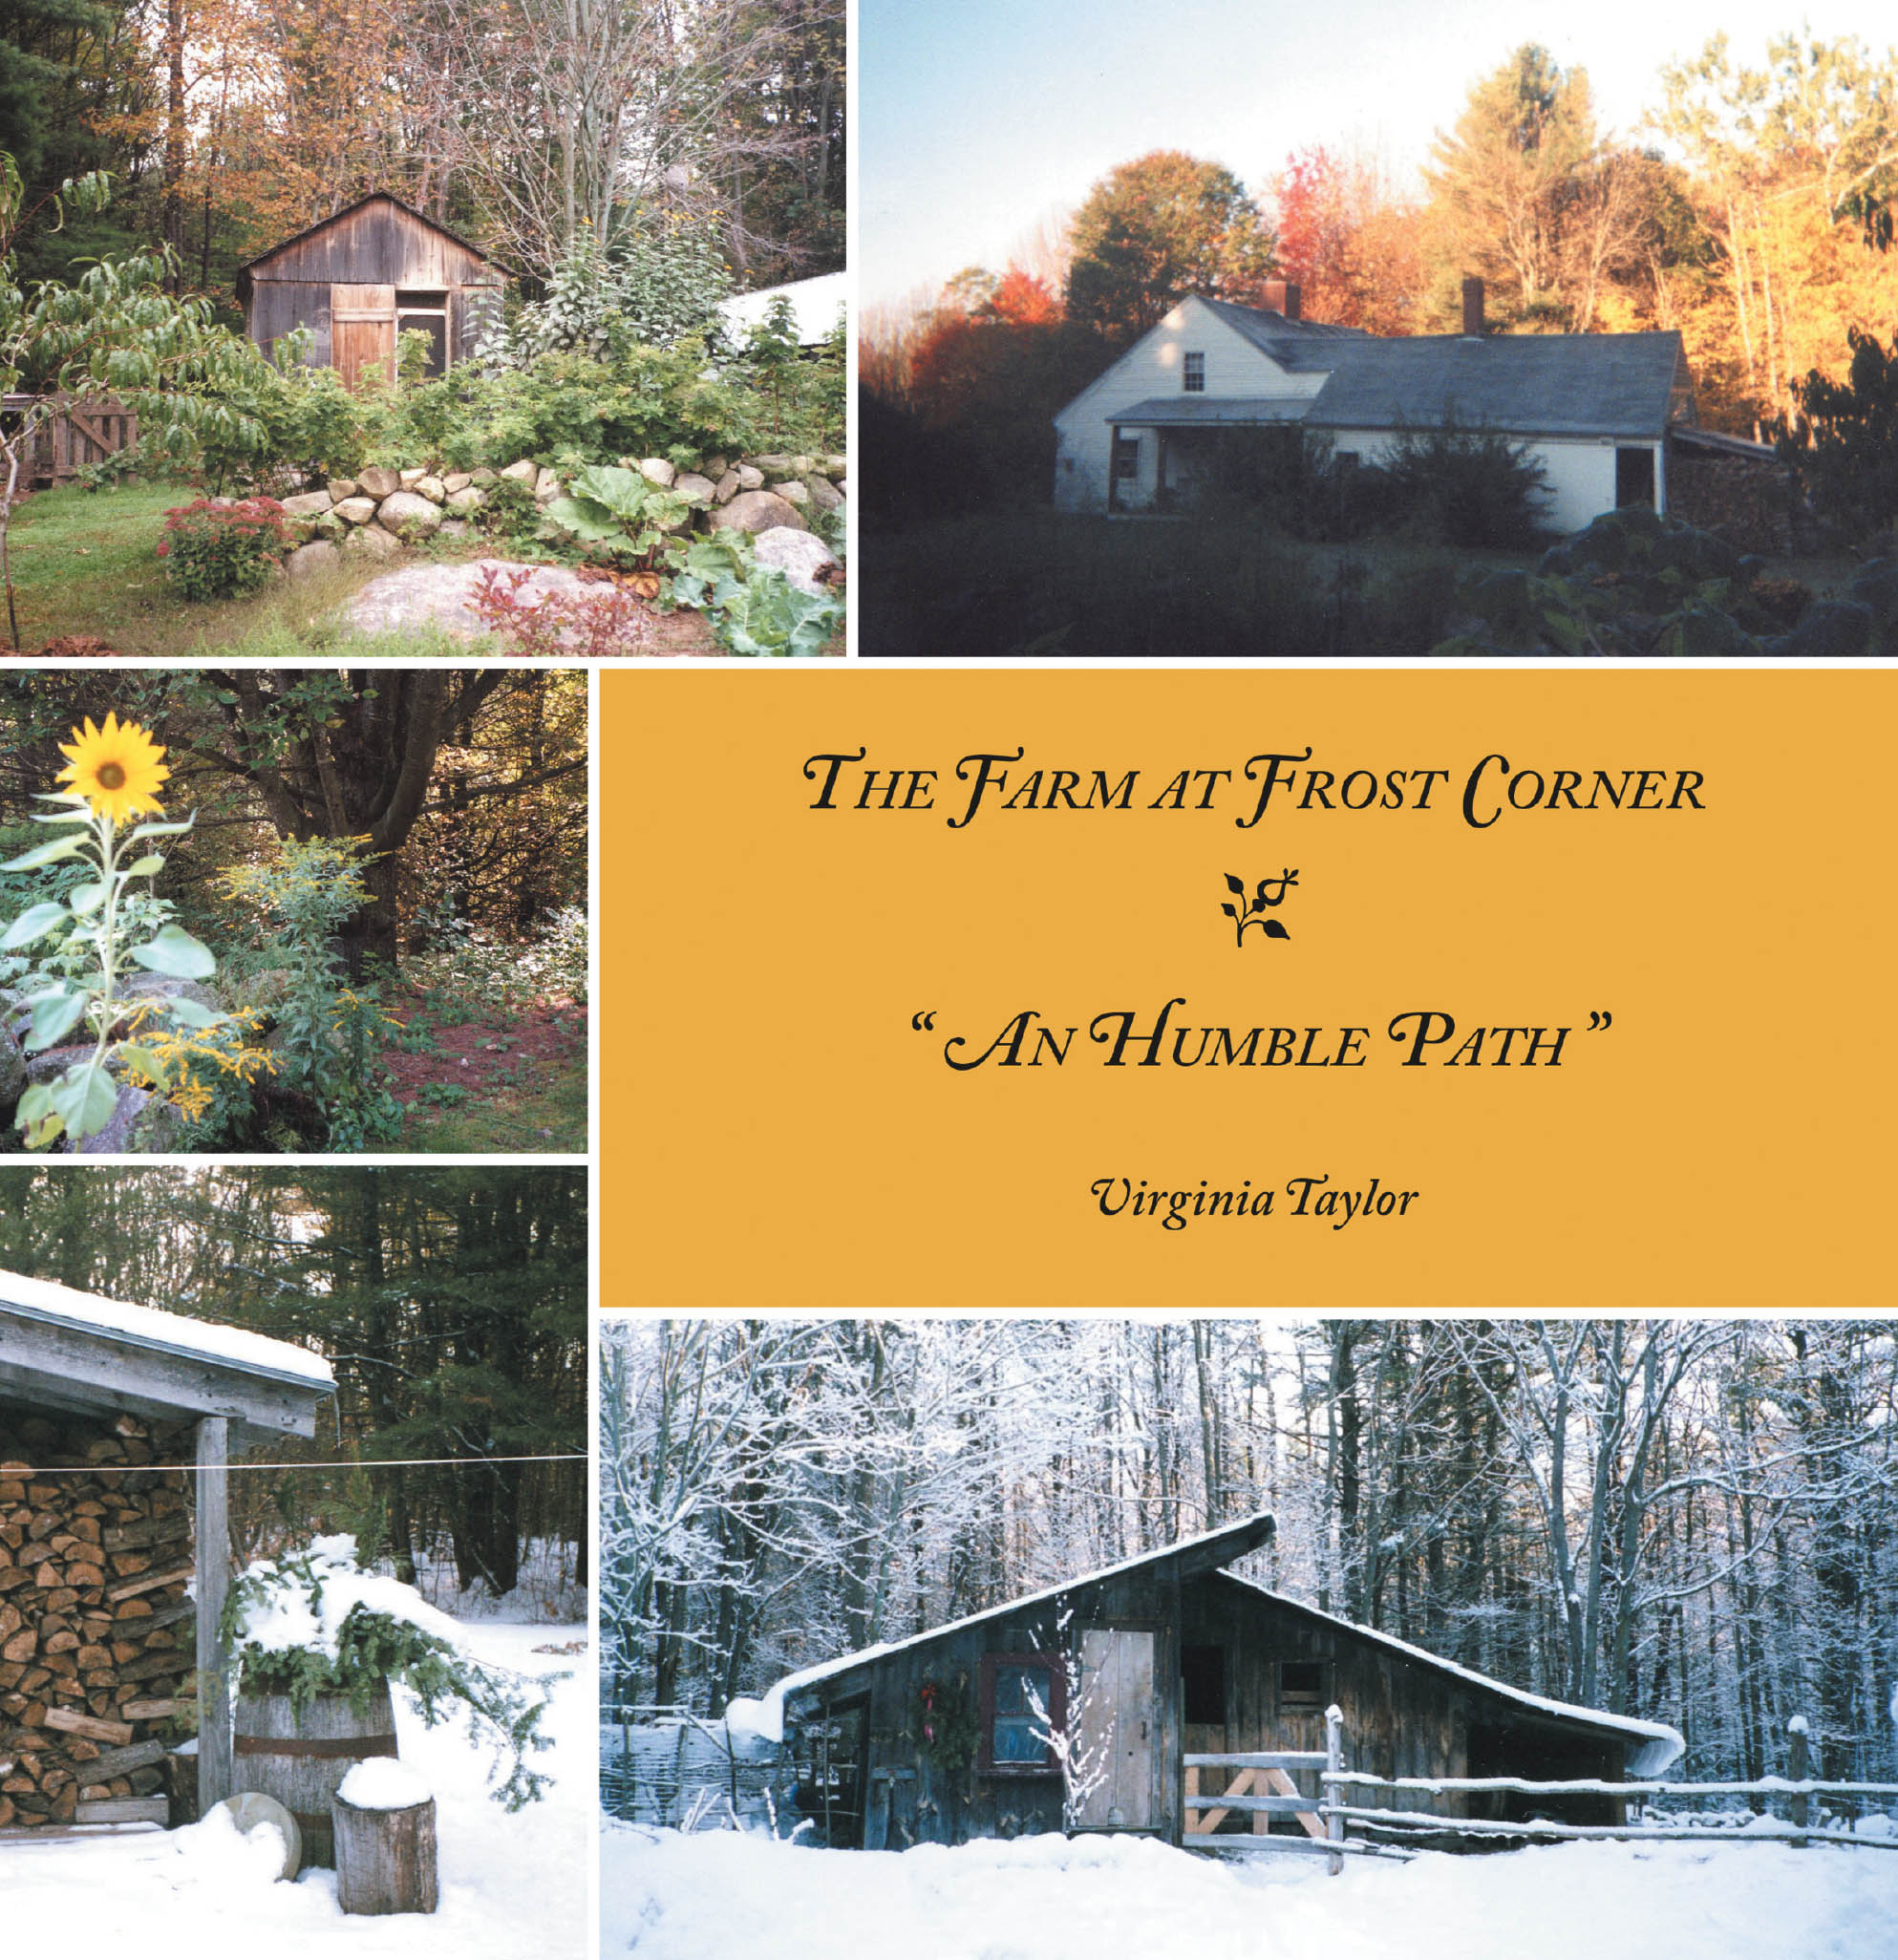 Author Virginia Taylor’s New Book, “The Farm at Frost Corner: An Humble Path,” Describes the Various Trials and Rewards of Running a Farm